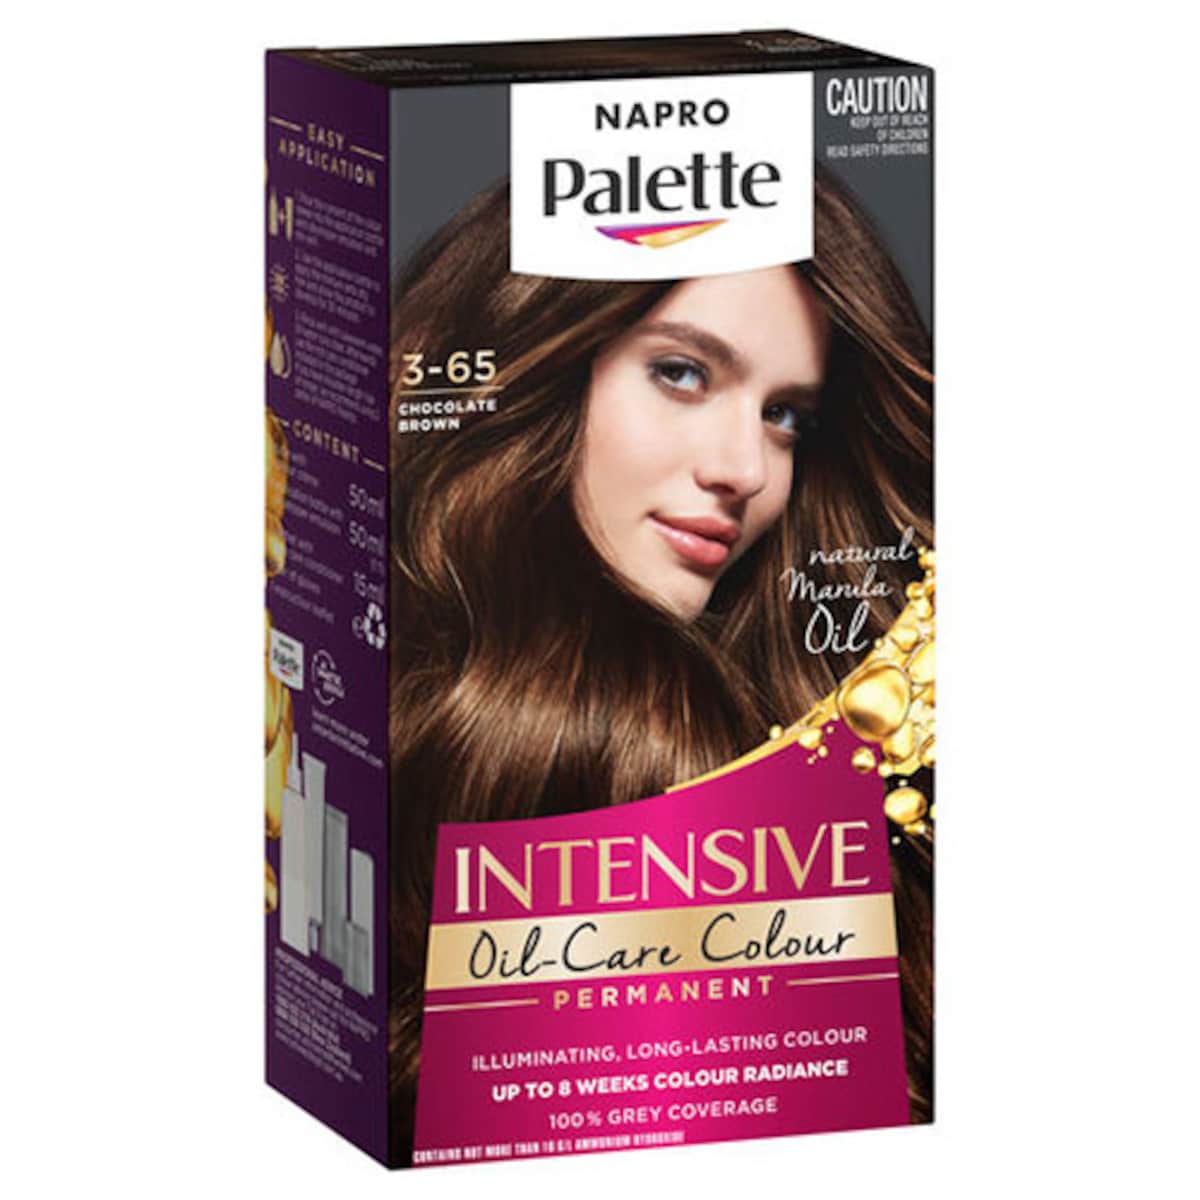 Napro Palette Hair Colour 3.65 Chocolate Brown by Schwarzkopf